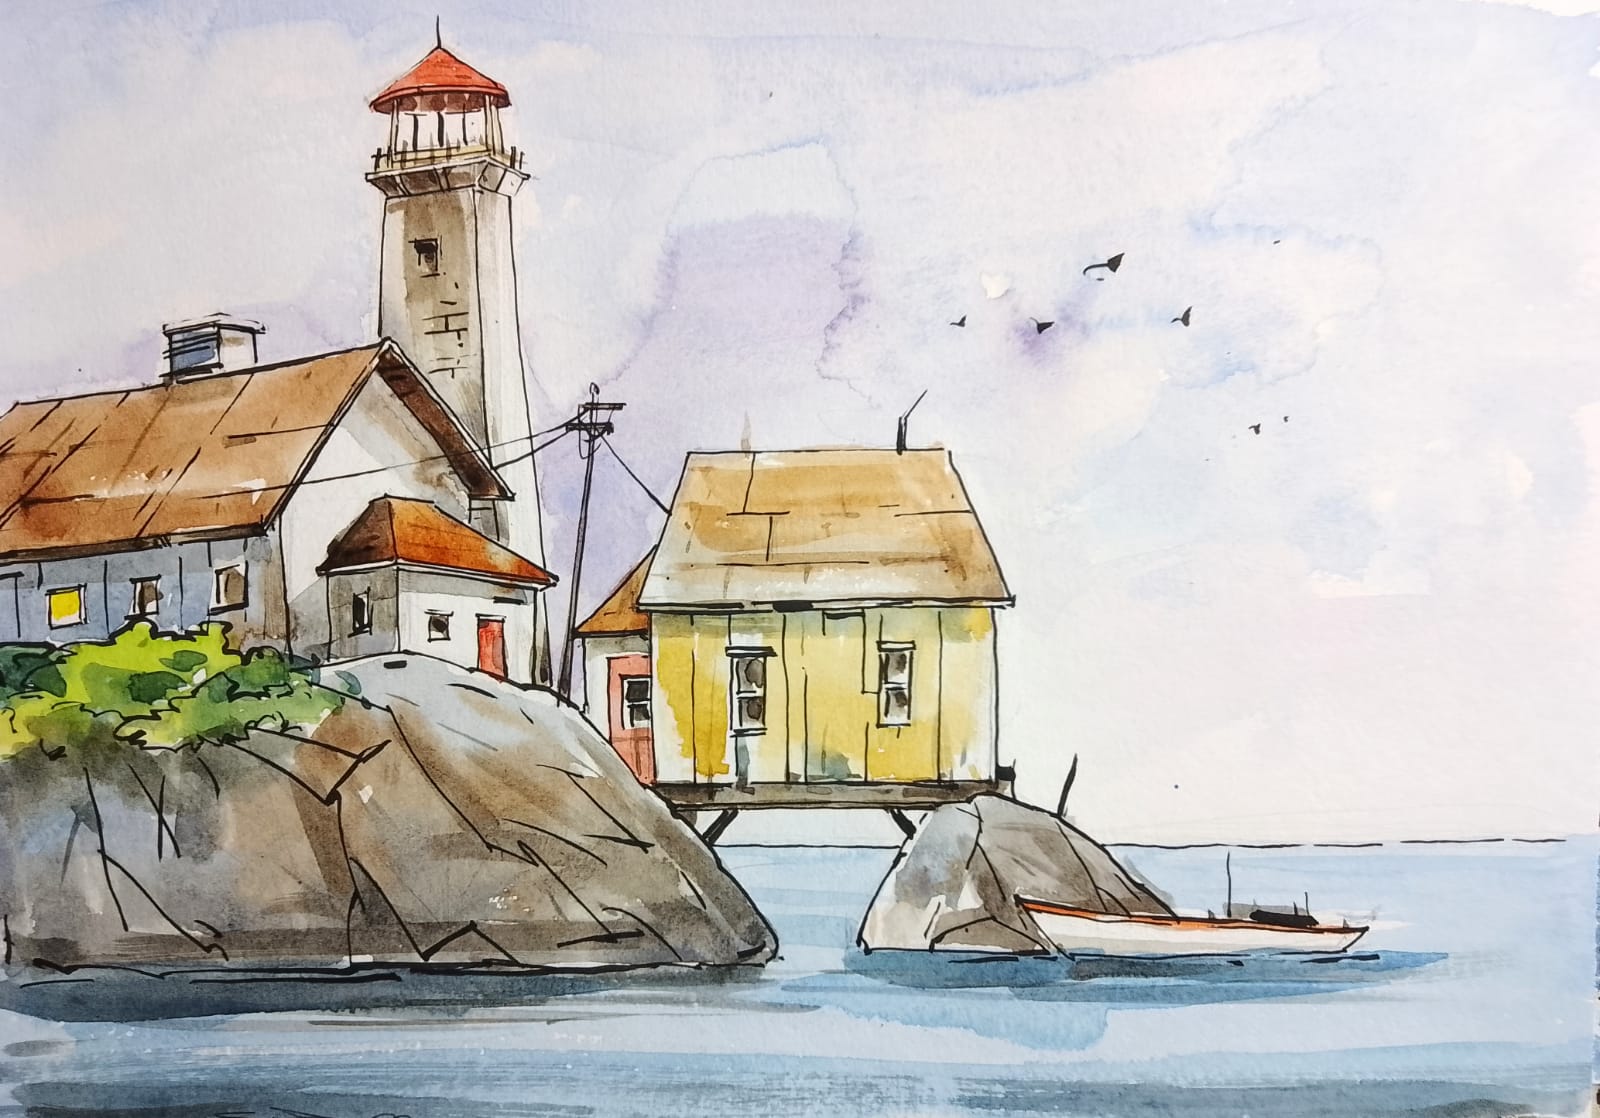 Light house Scenery - Water Color